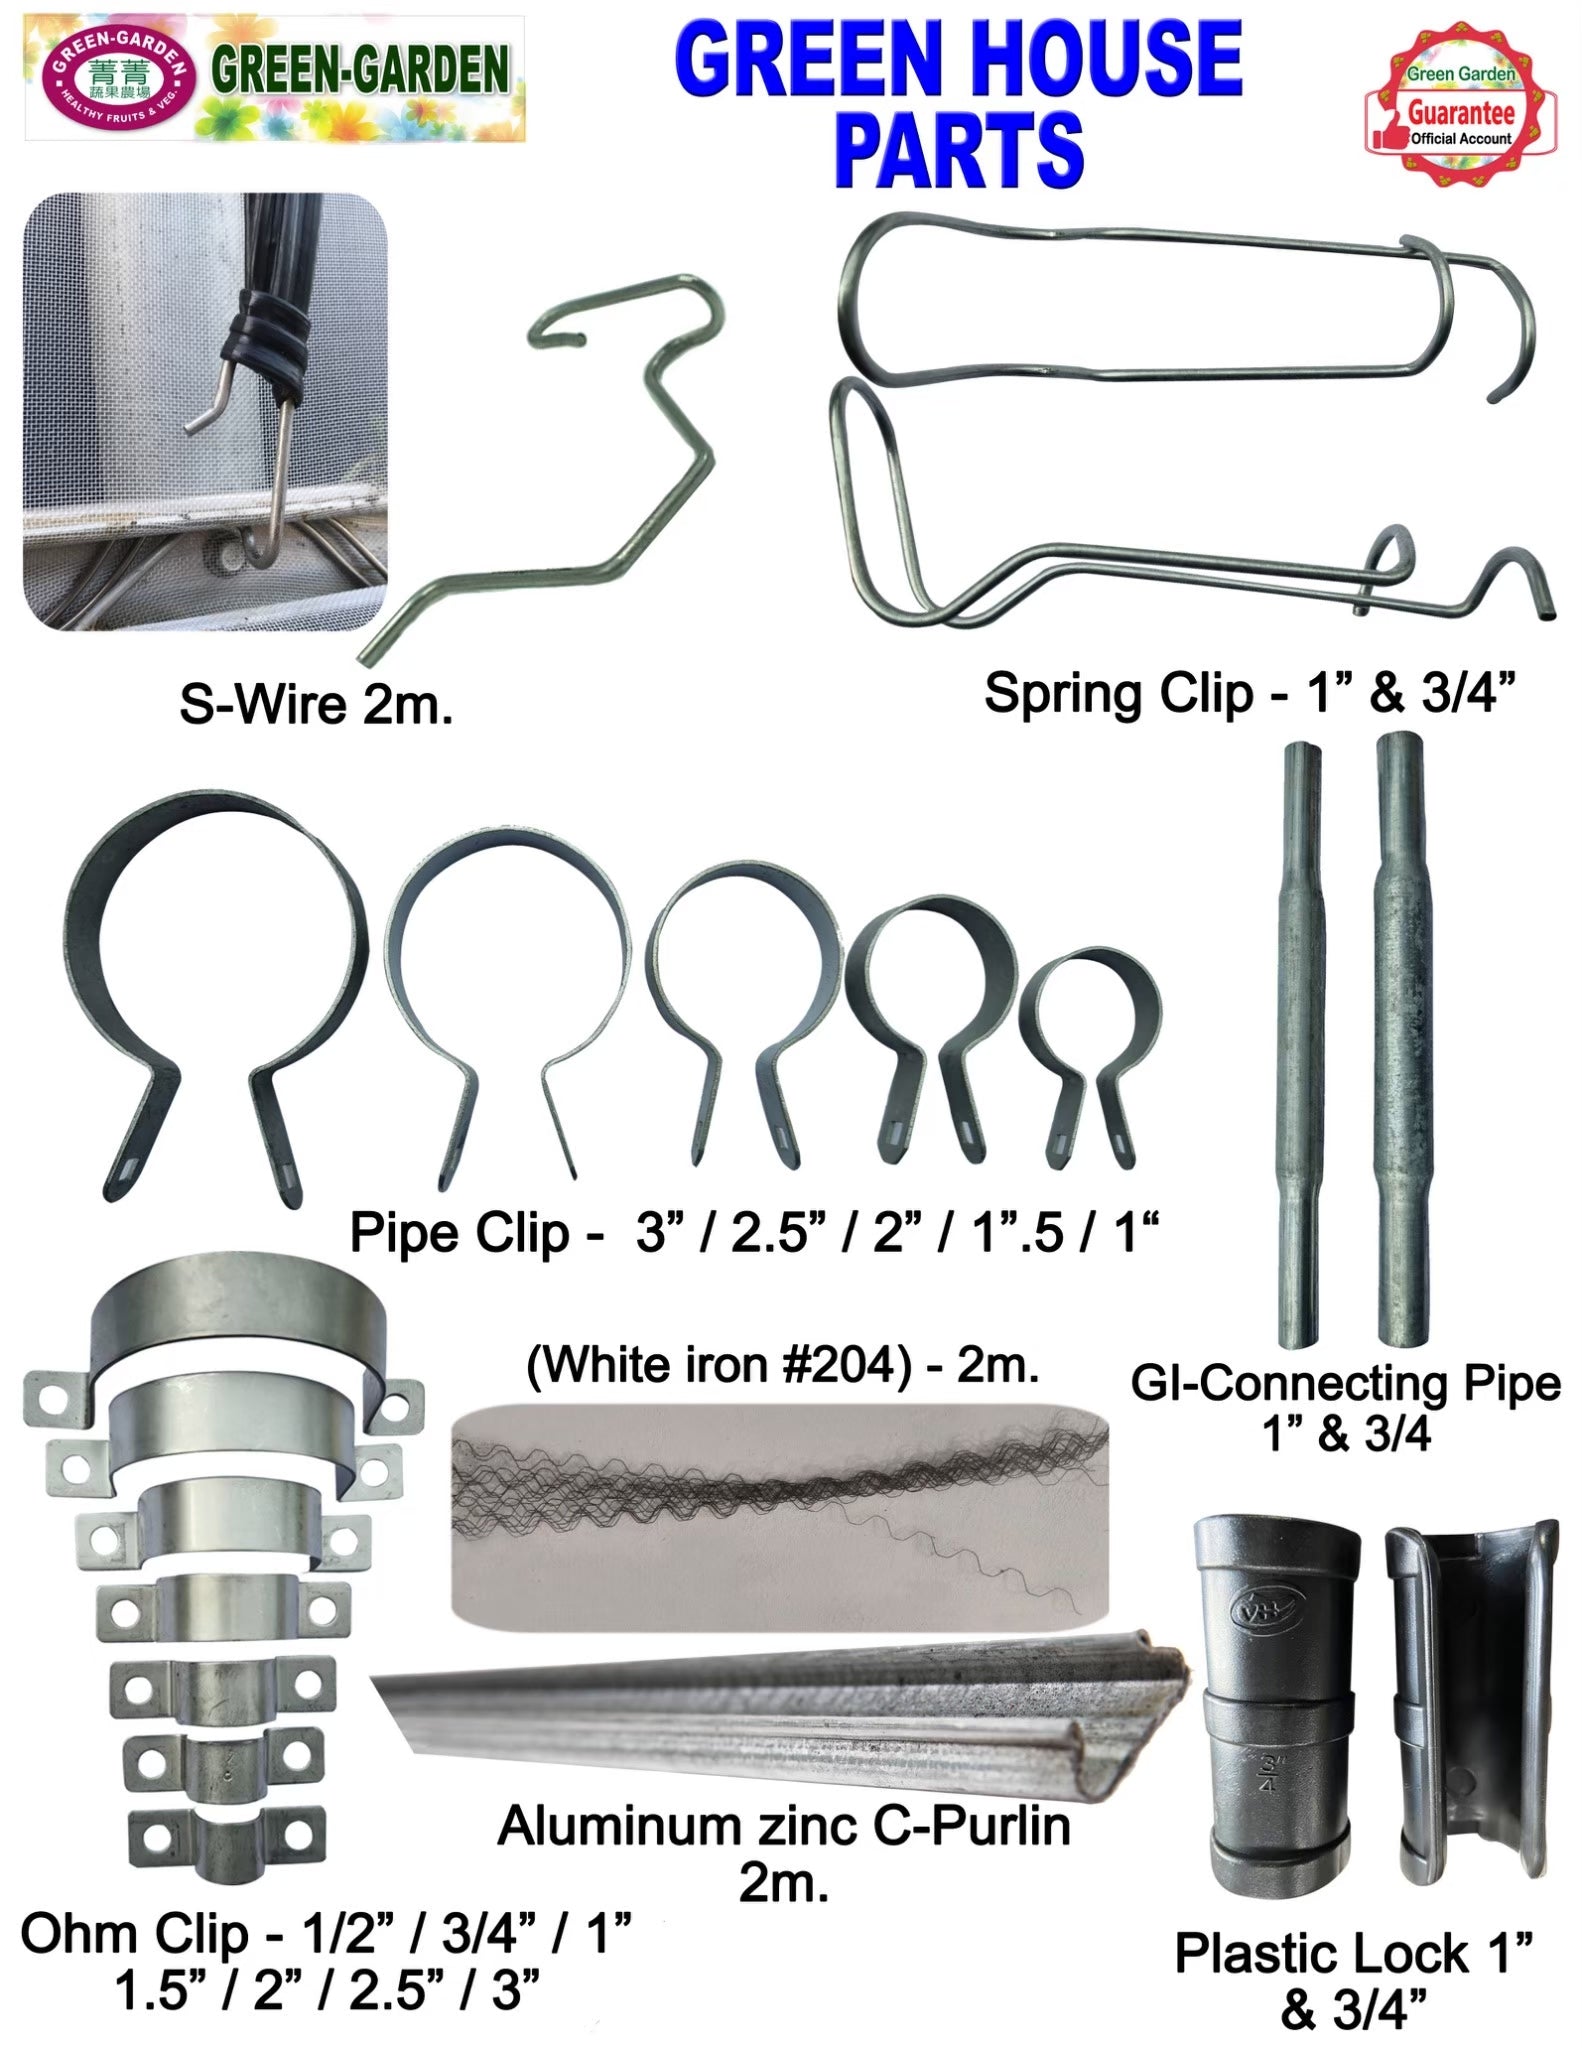 Green House Part Spring Clip 1" and 3/4"